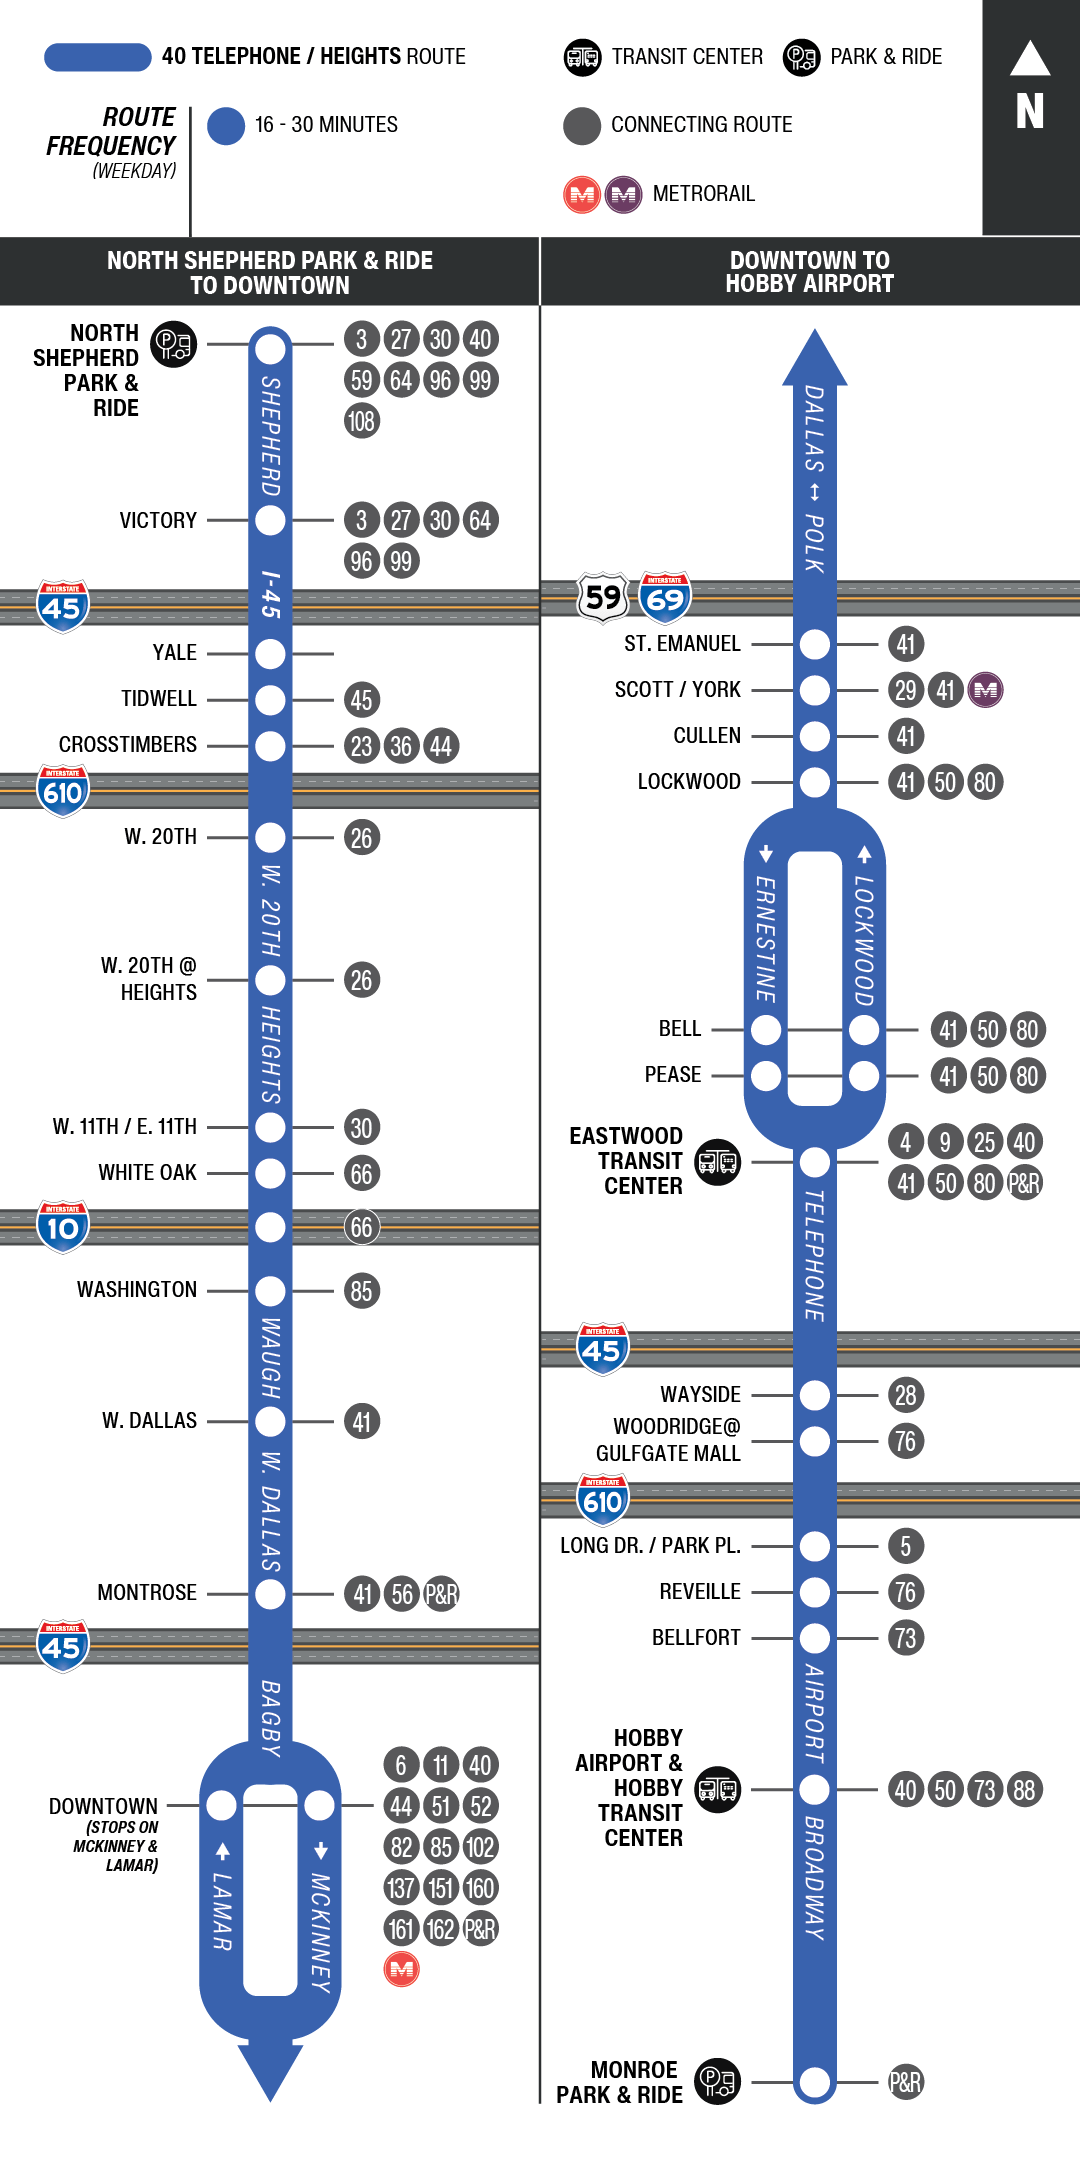 Route map for 40 Telephone / Heights bus